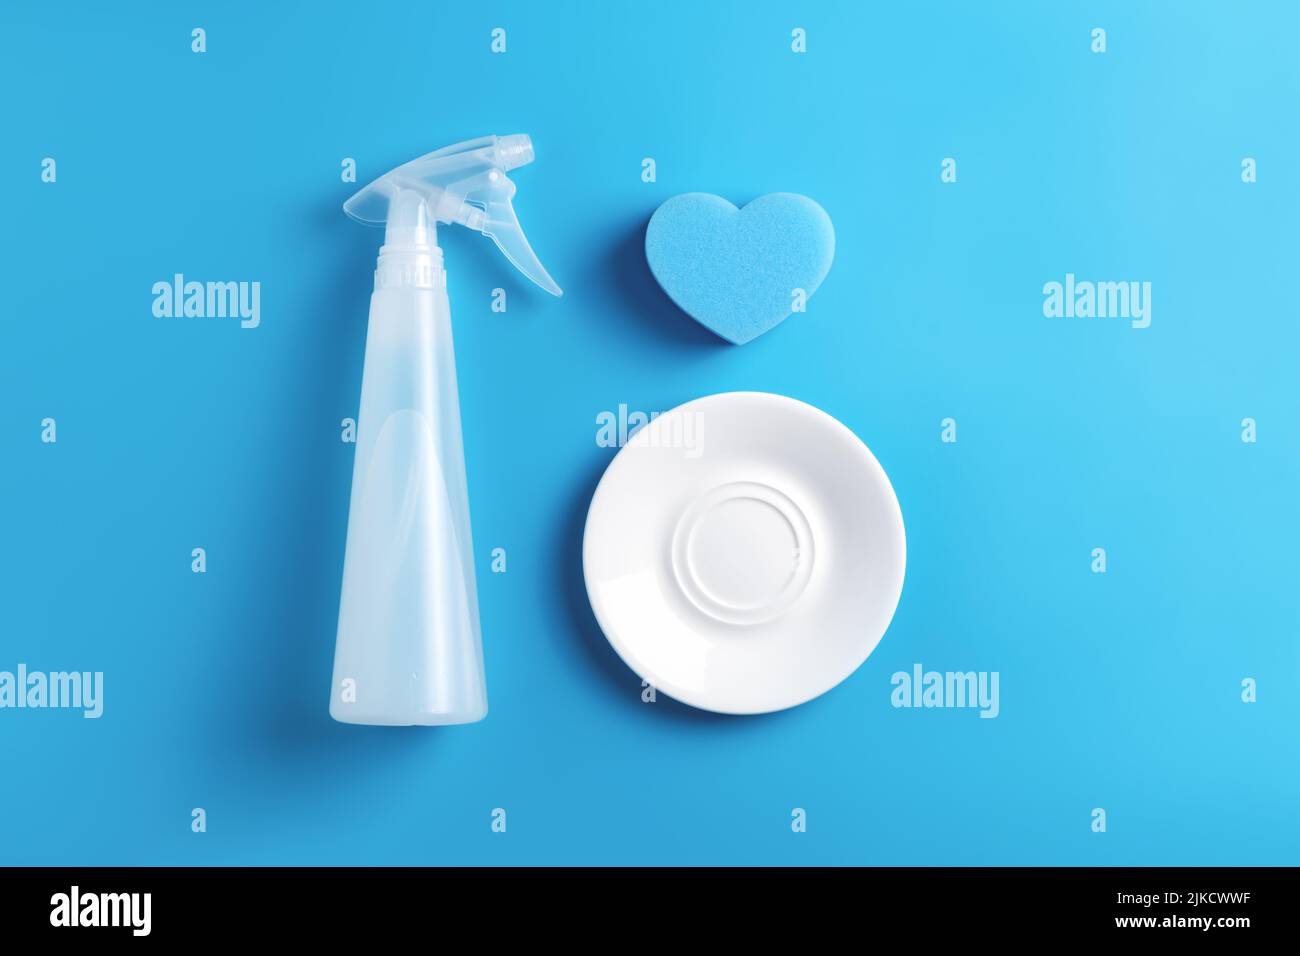 Kitchen flat lay with blue heart sponge, transparent dish cleaning spray bottle and white glass clean plate on blue background. Dishwashing concept. Stock Photo